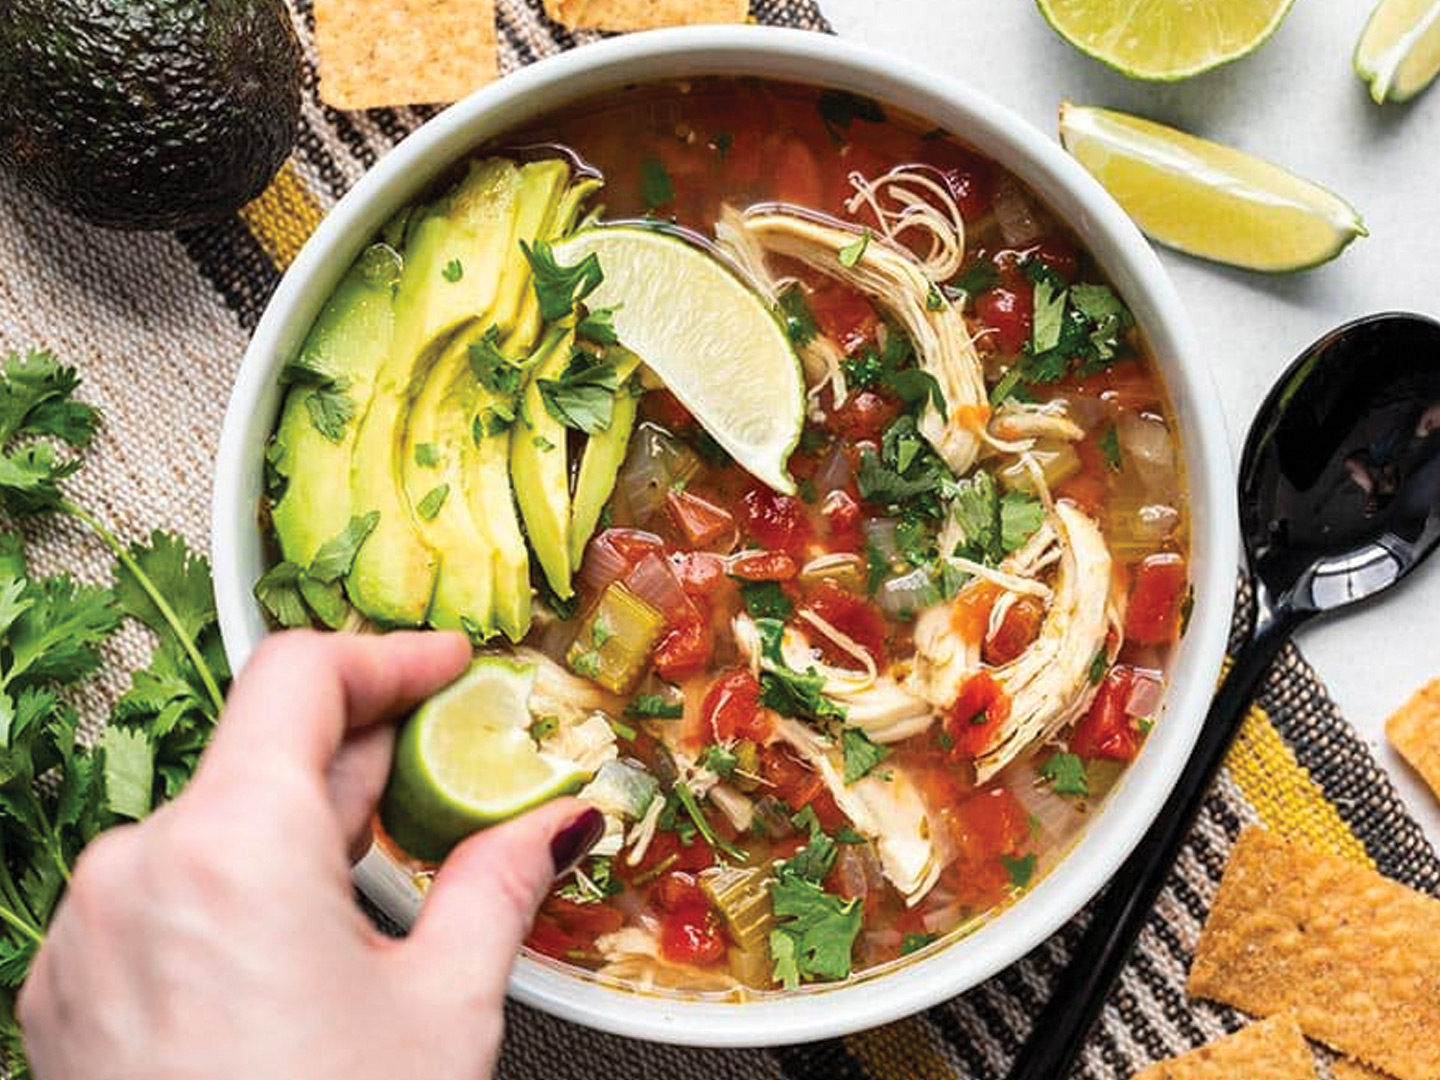 Tasty Tuesday – Chipotle Chicken Zucchini Soup